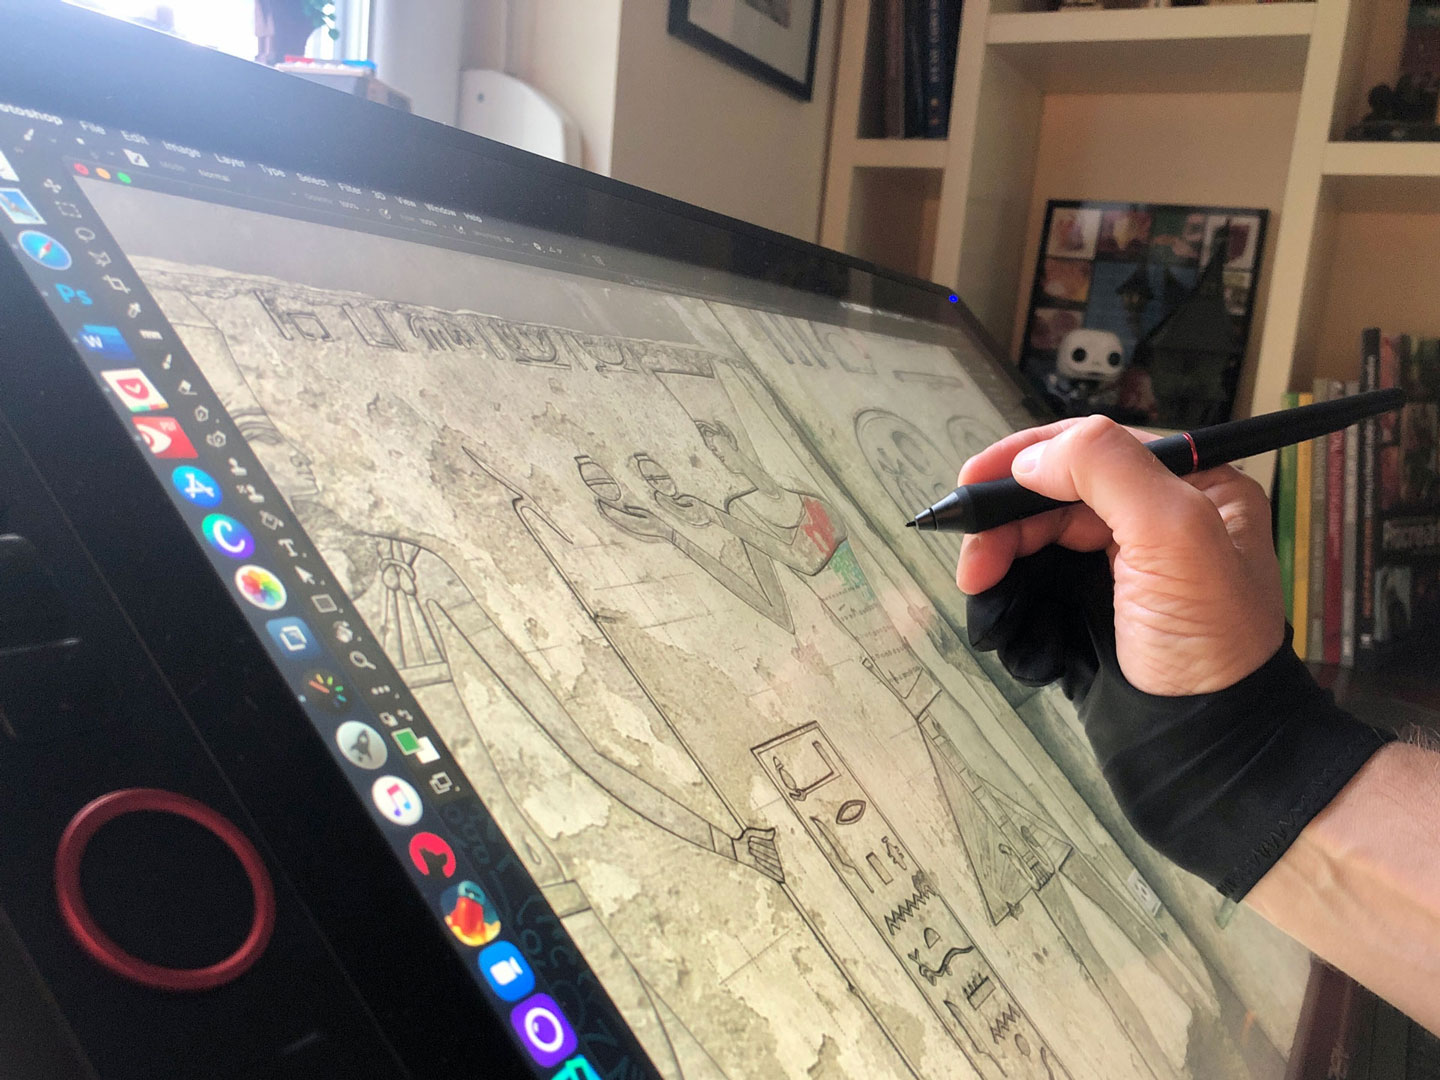 Positioning the XP-PEN Artist Pro 24 on your desk